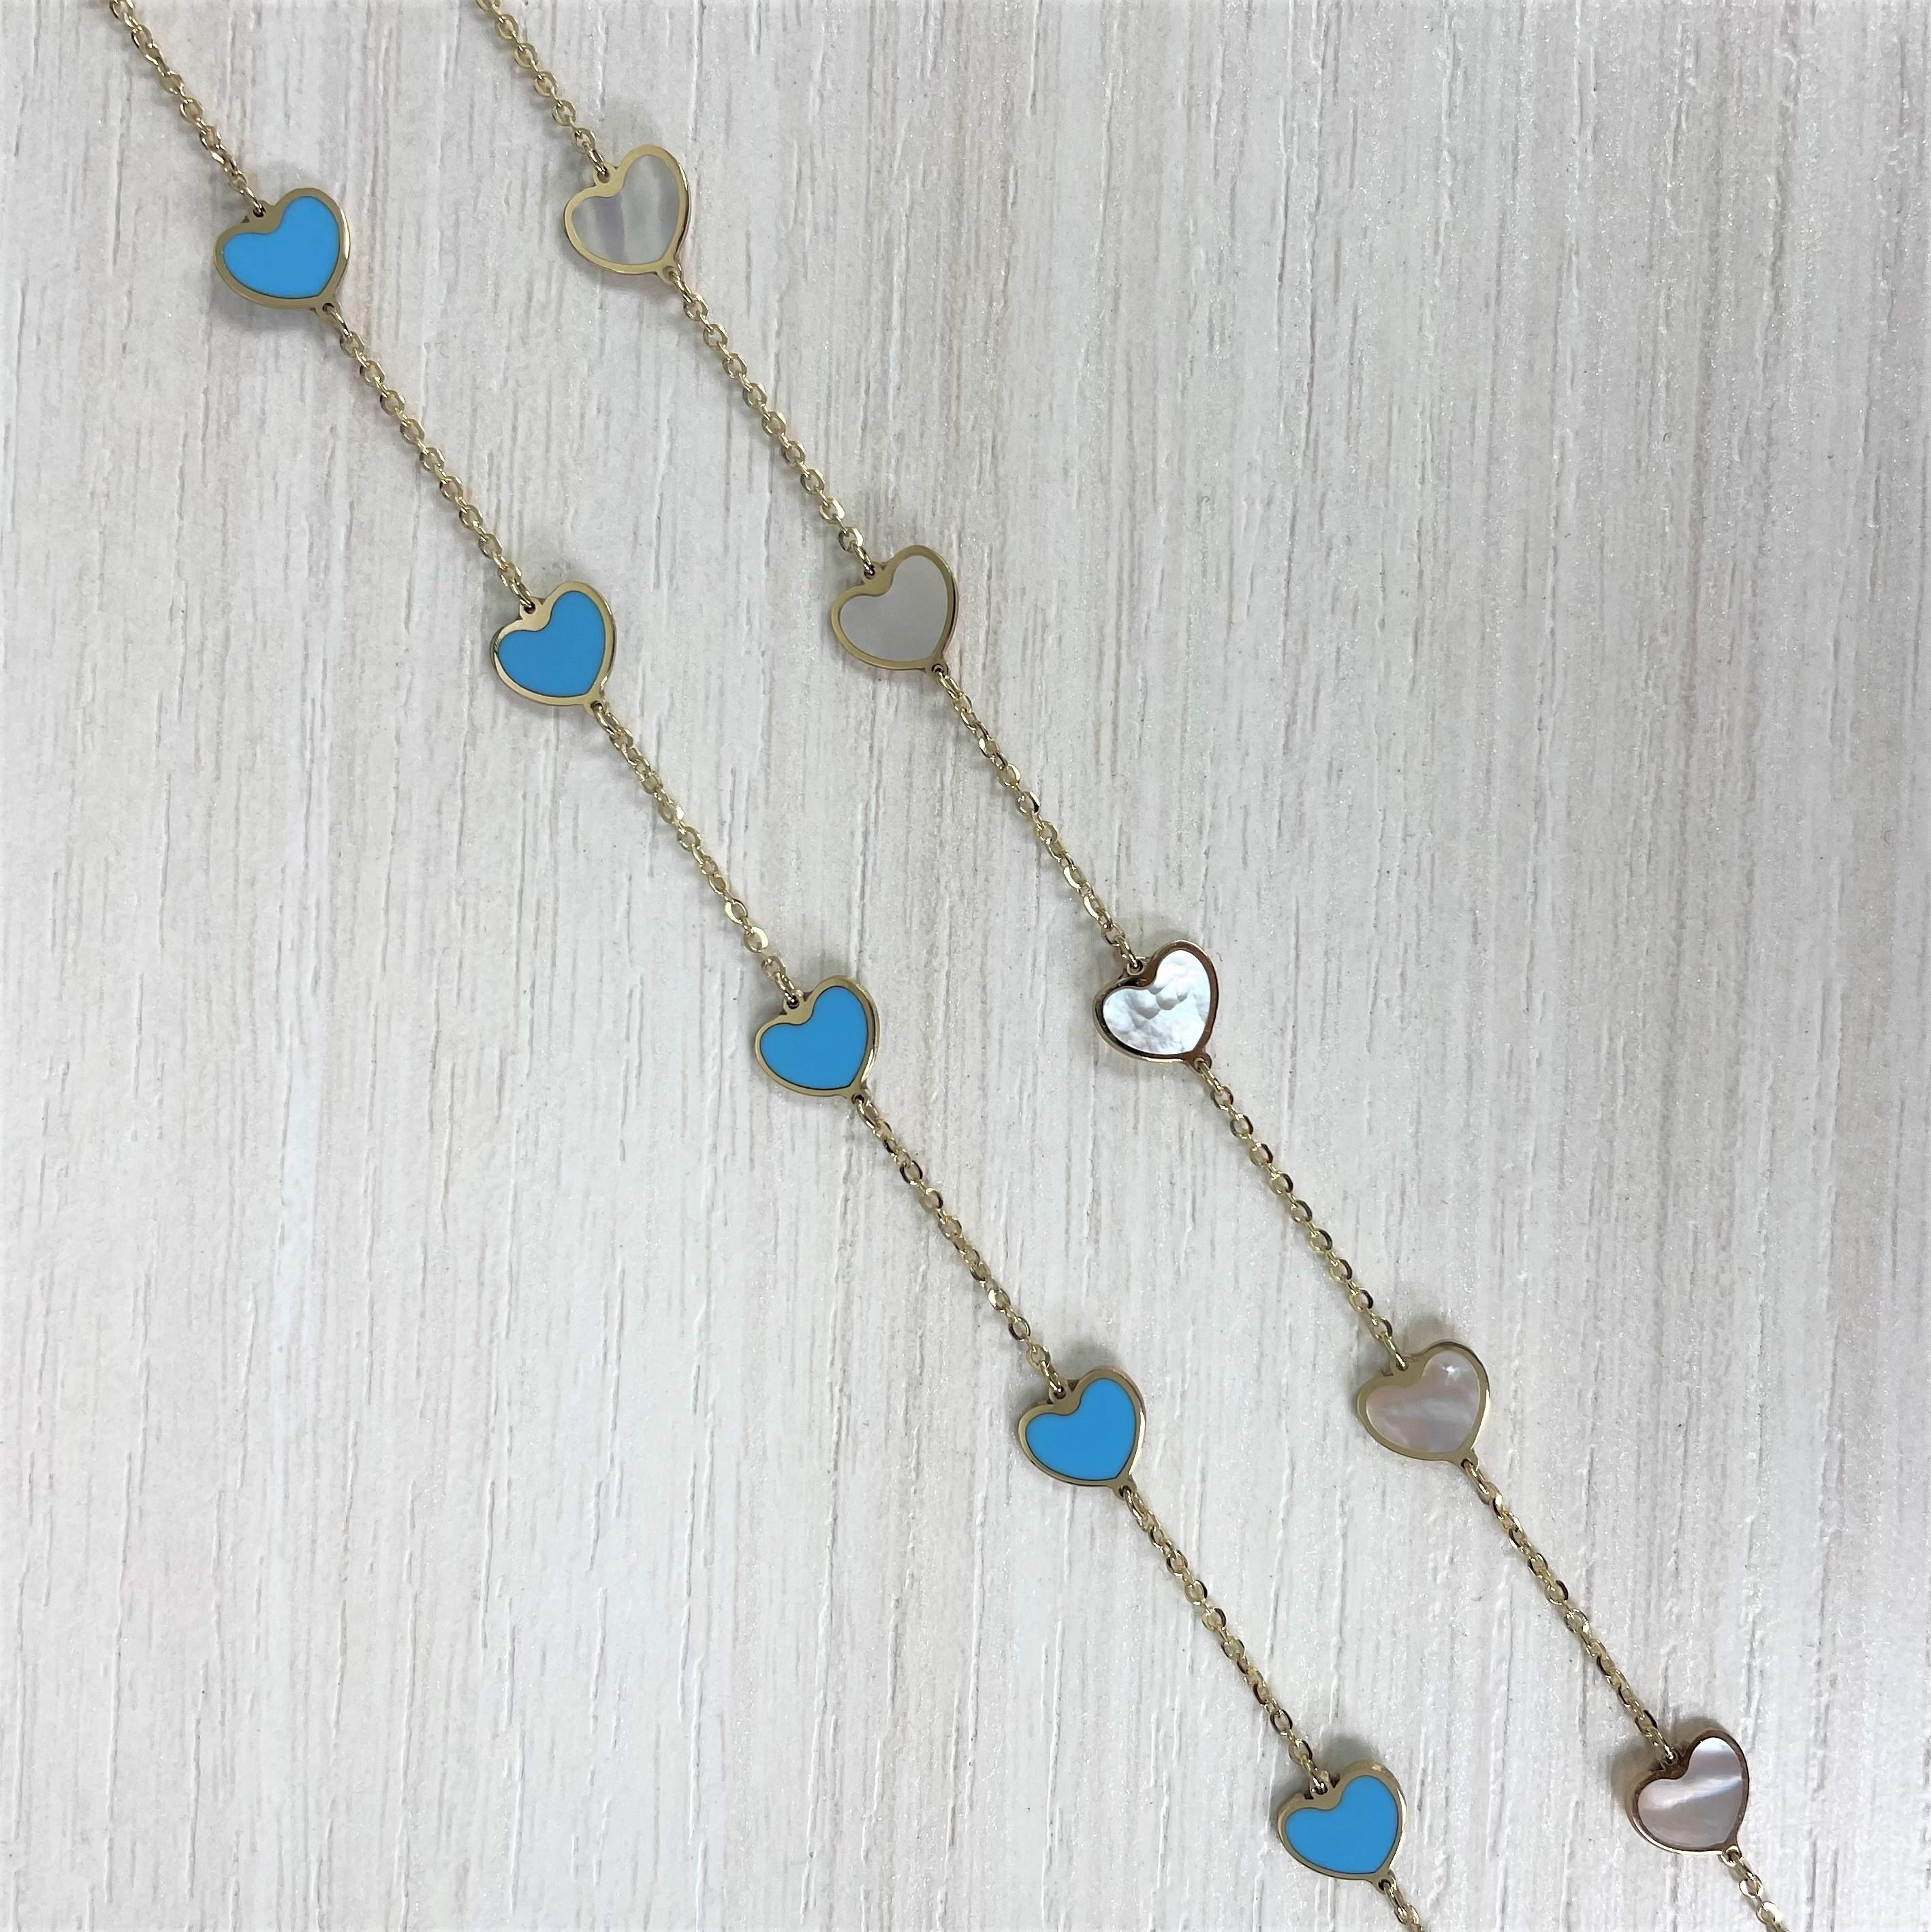 Quality Gemstone Clover Necklace: Focused on design and detail, this beautiful colored gemstone necklace features a station design and is crafted of 14k yellow gold. Necklace measurement is 18